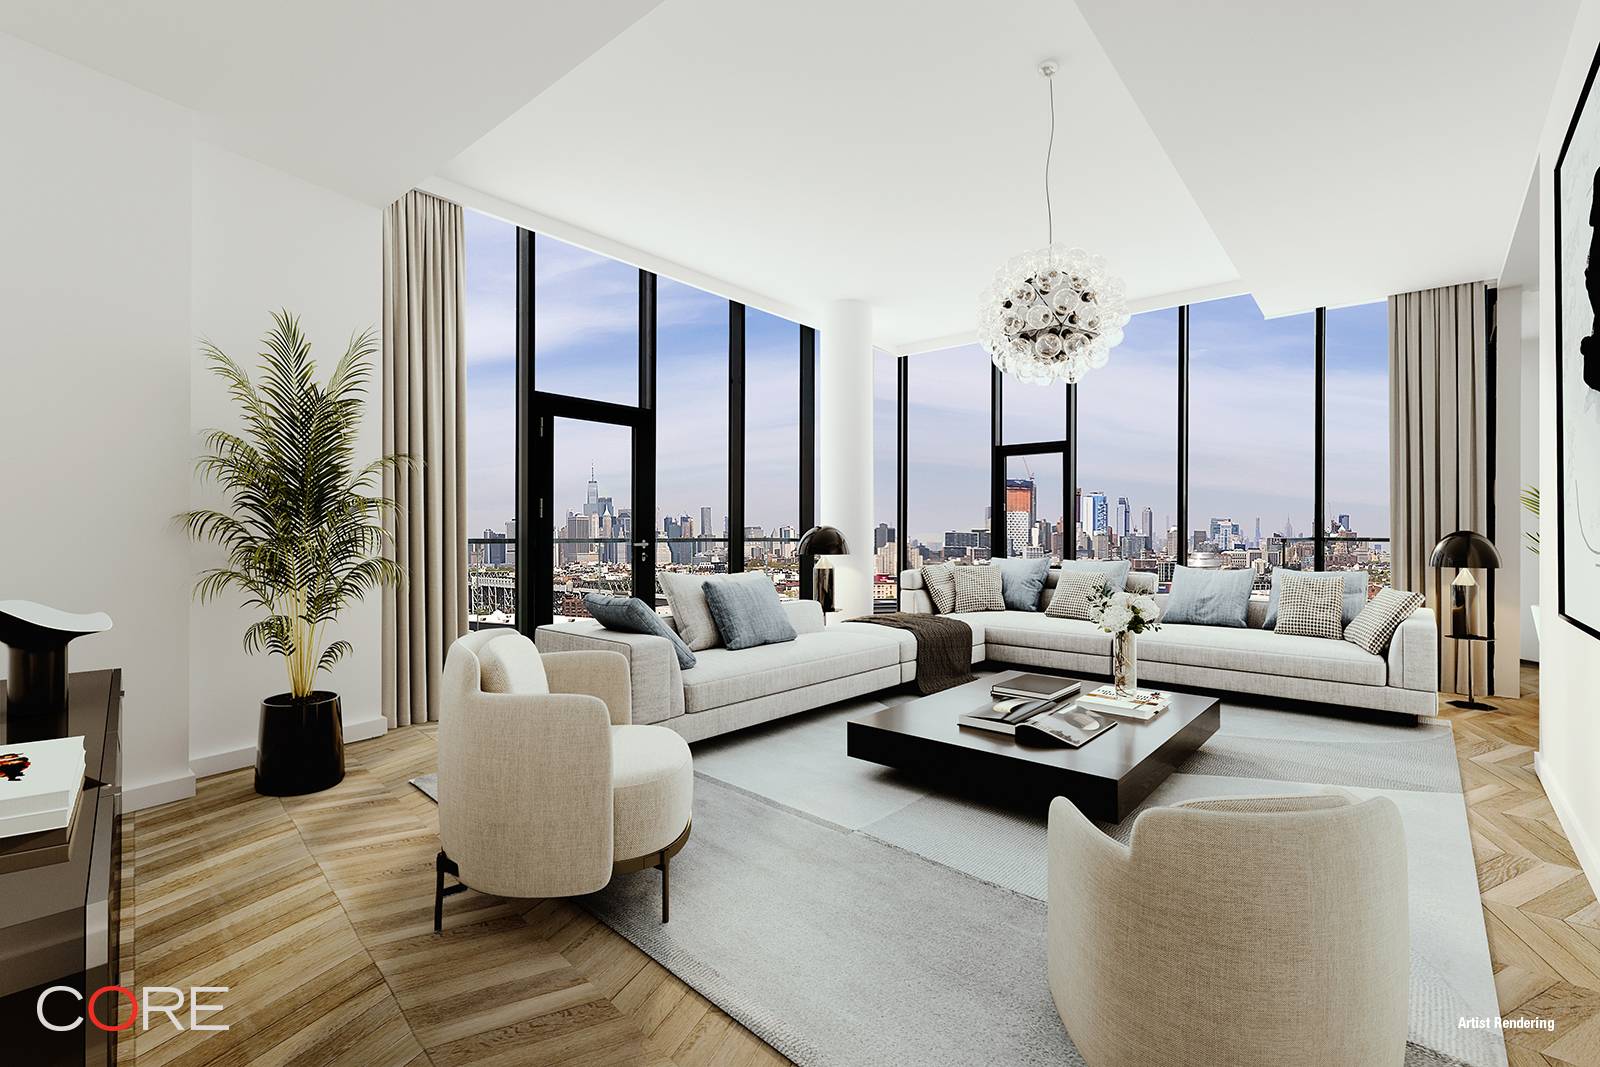 The opportunity of a lifetime awaits in this never before offered Penthouse.